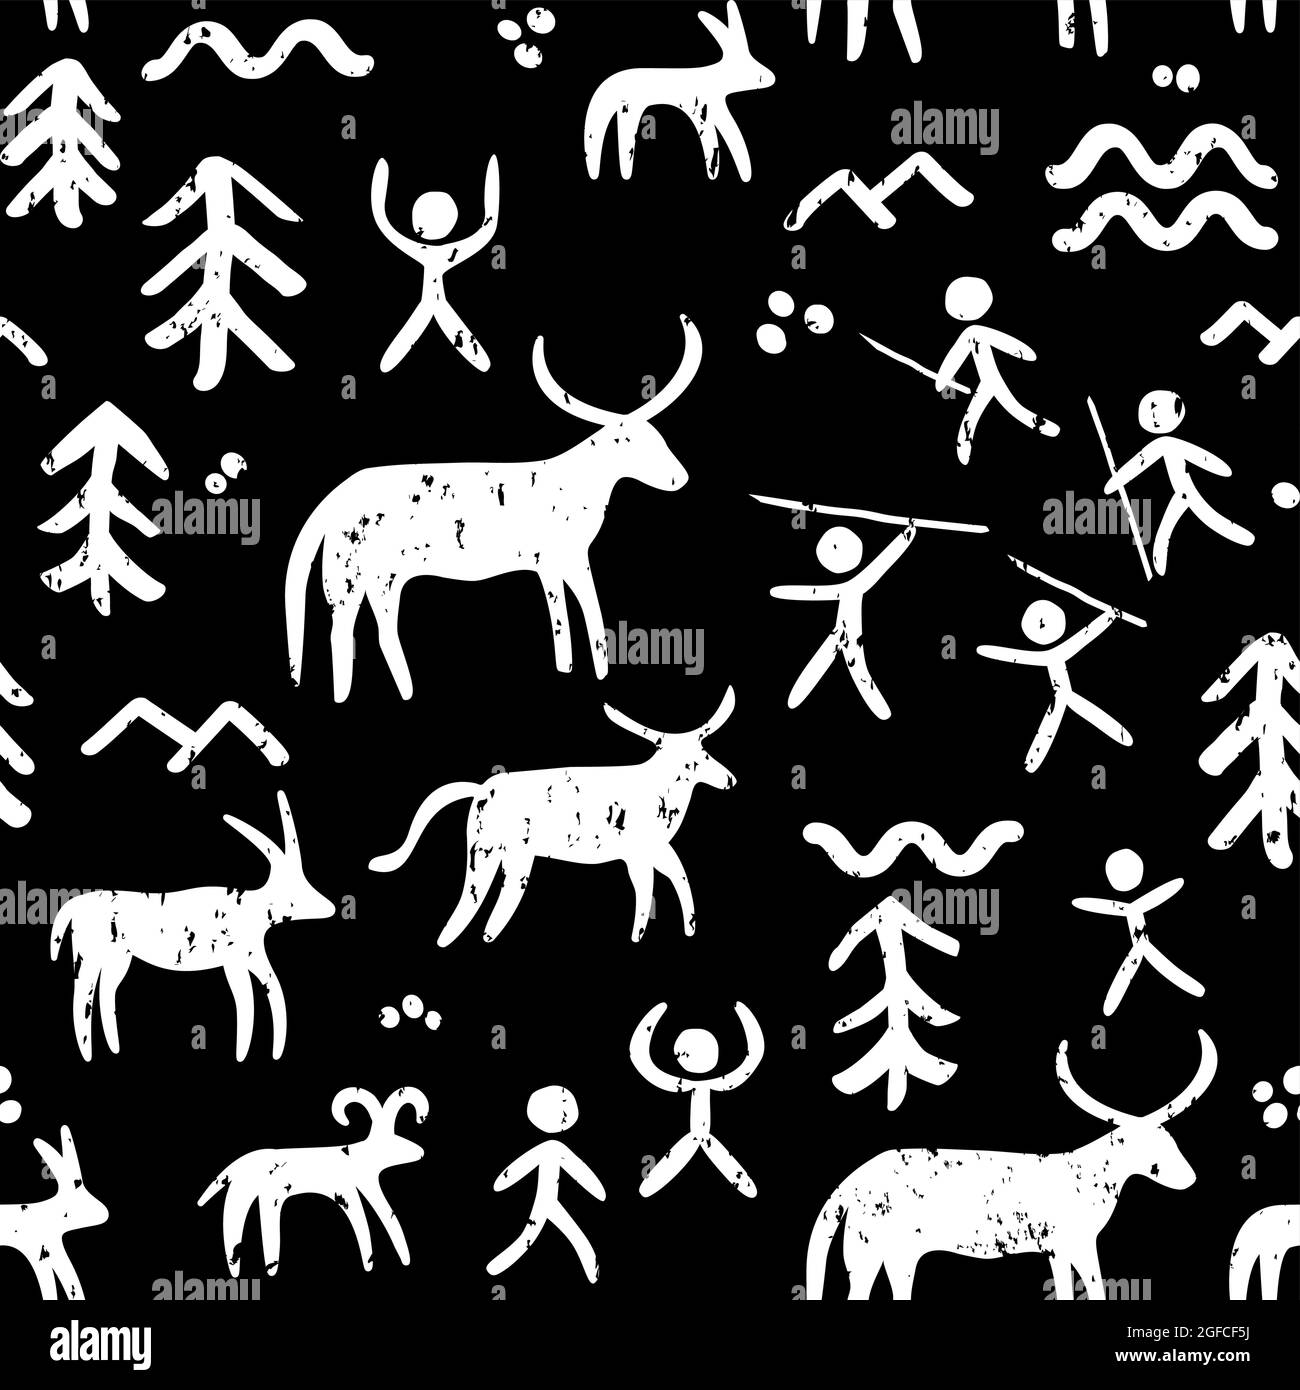 Cave paintings vector seamless pattern, repetitive background inspired by prehistoric art with cavemen hunting animals in white on black Stock Vector